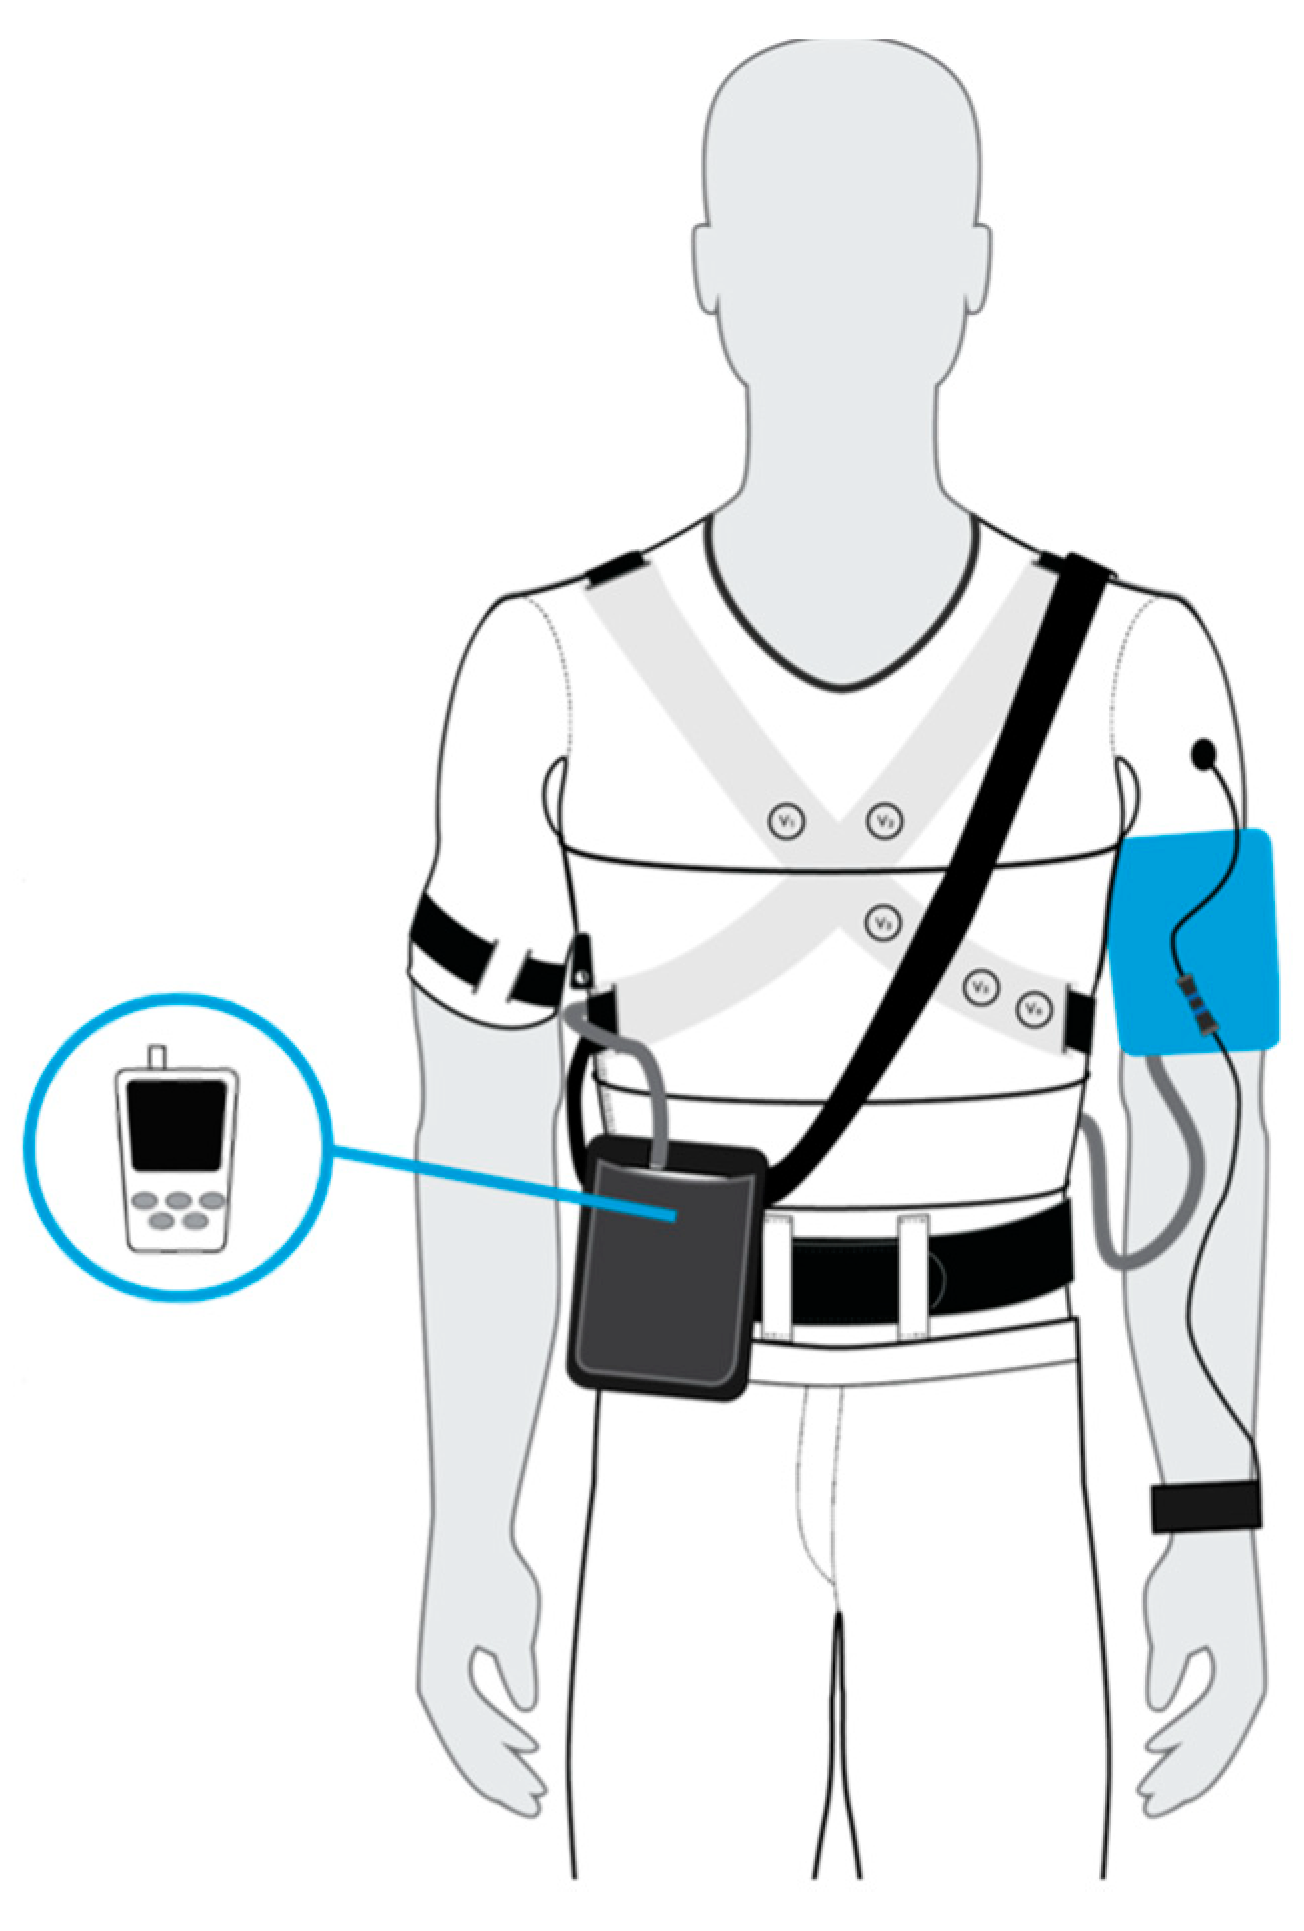 This wearable waist belt automatically adjusts pressure + corrects